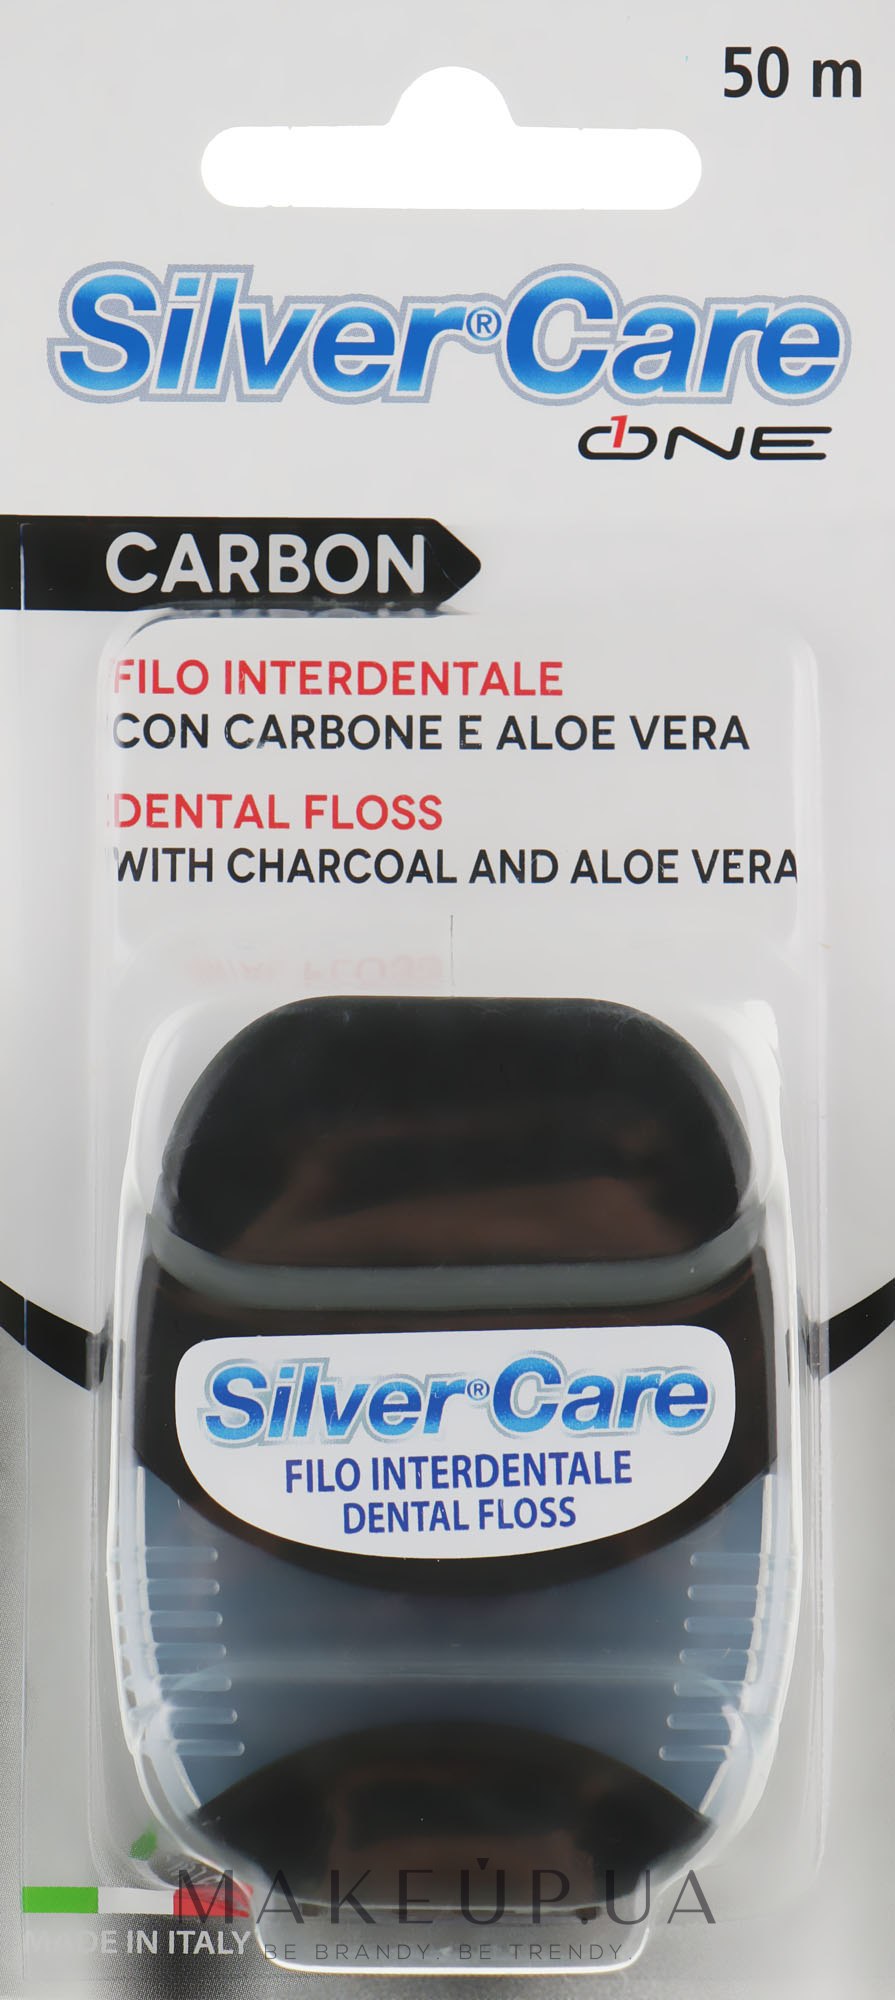 Зубна нитка, 50 м - Silver Care Carbon — фото 50м